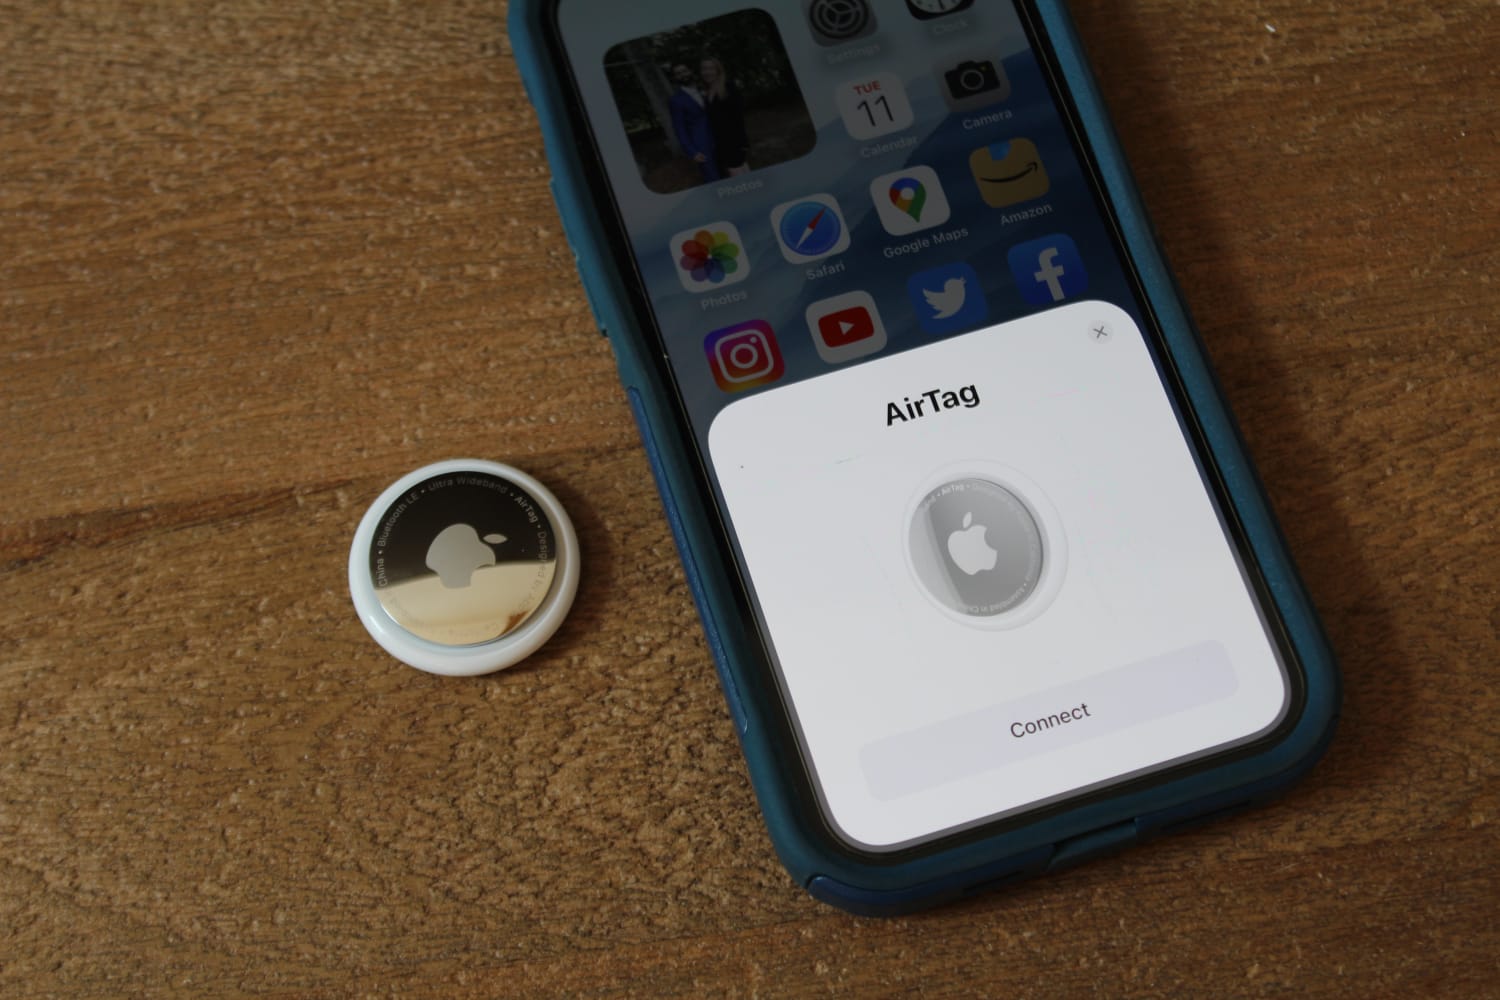 Apple AirTag: do you really need them? The cute wireless tracker